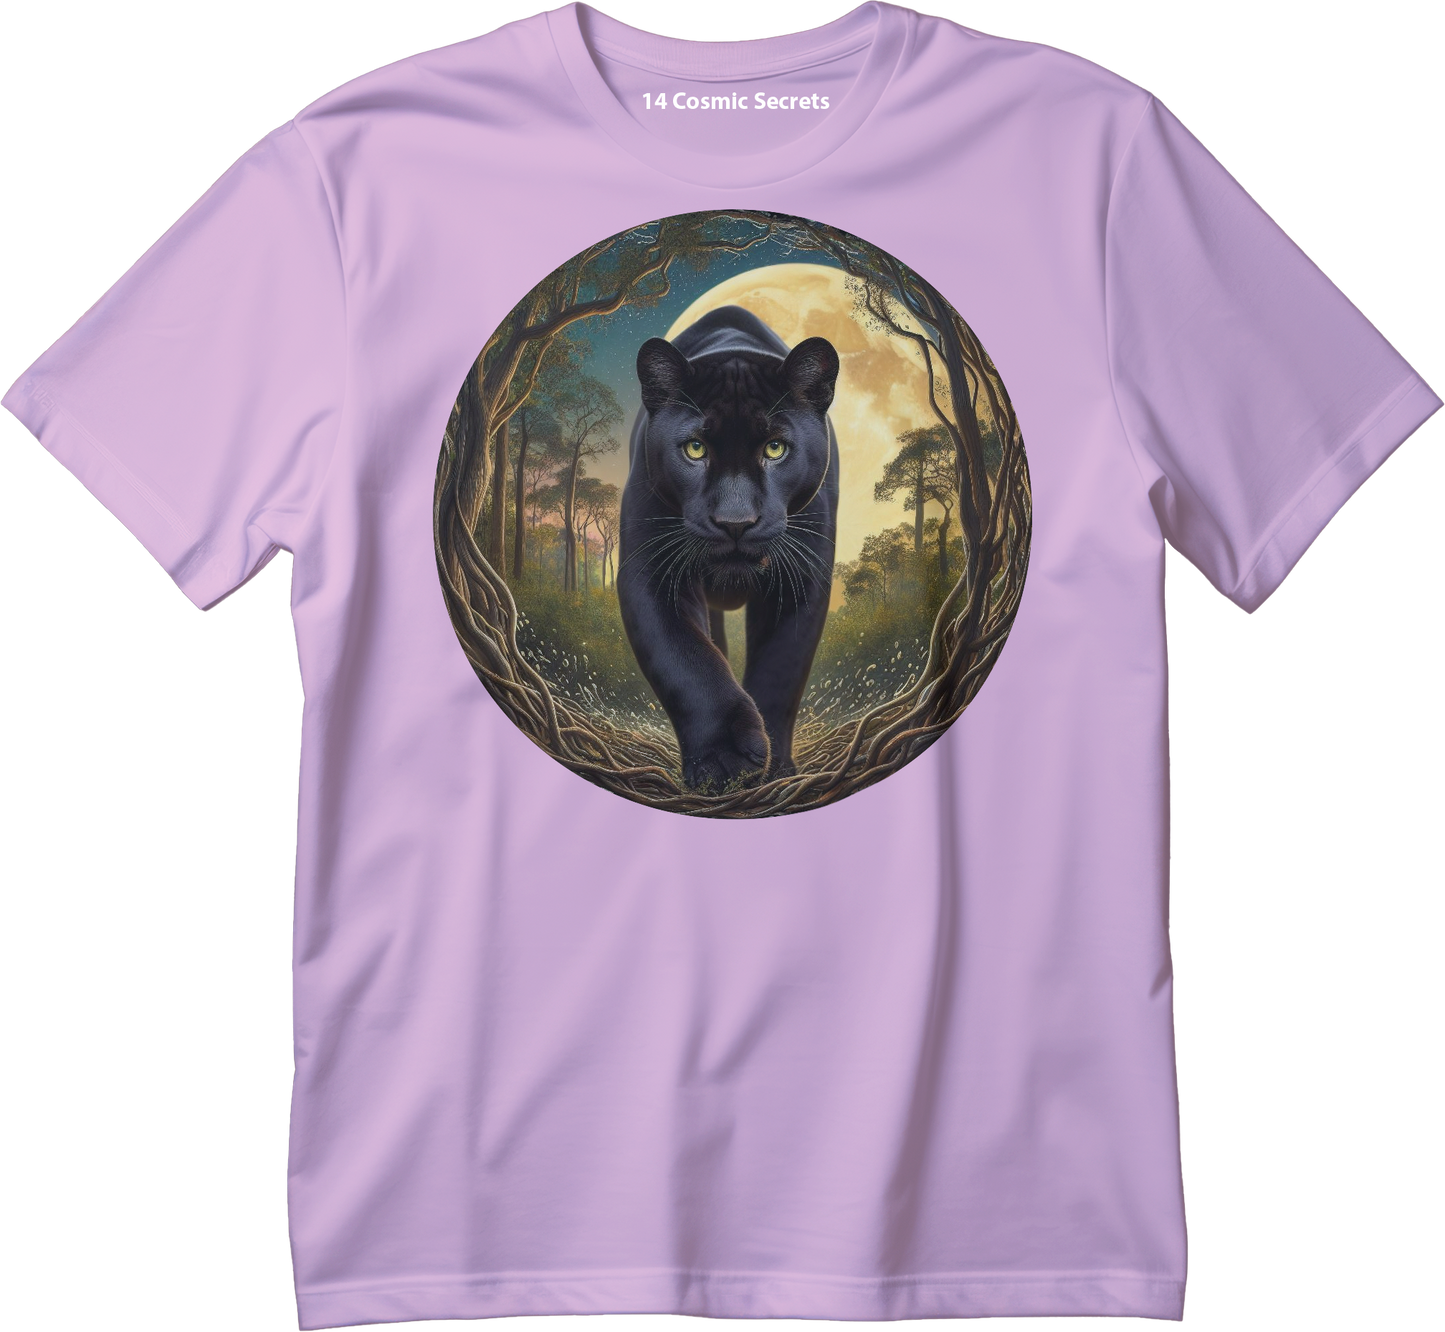 Black Panther on a Moon Night Graphic T-Shirt  Cotton T-Shirt Magnificence of India T-Shirt